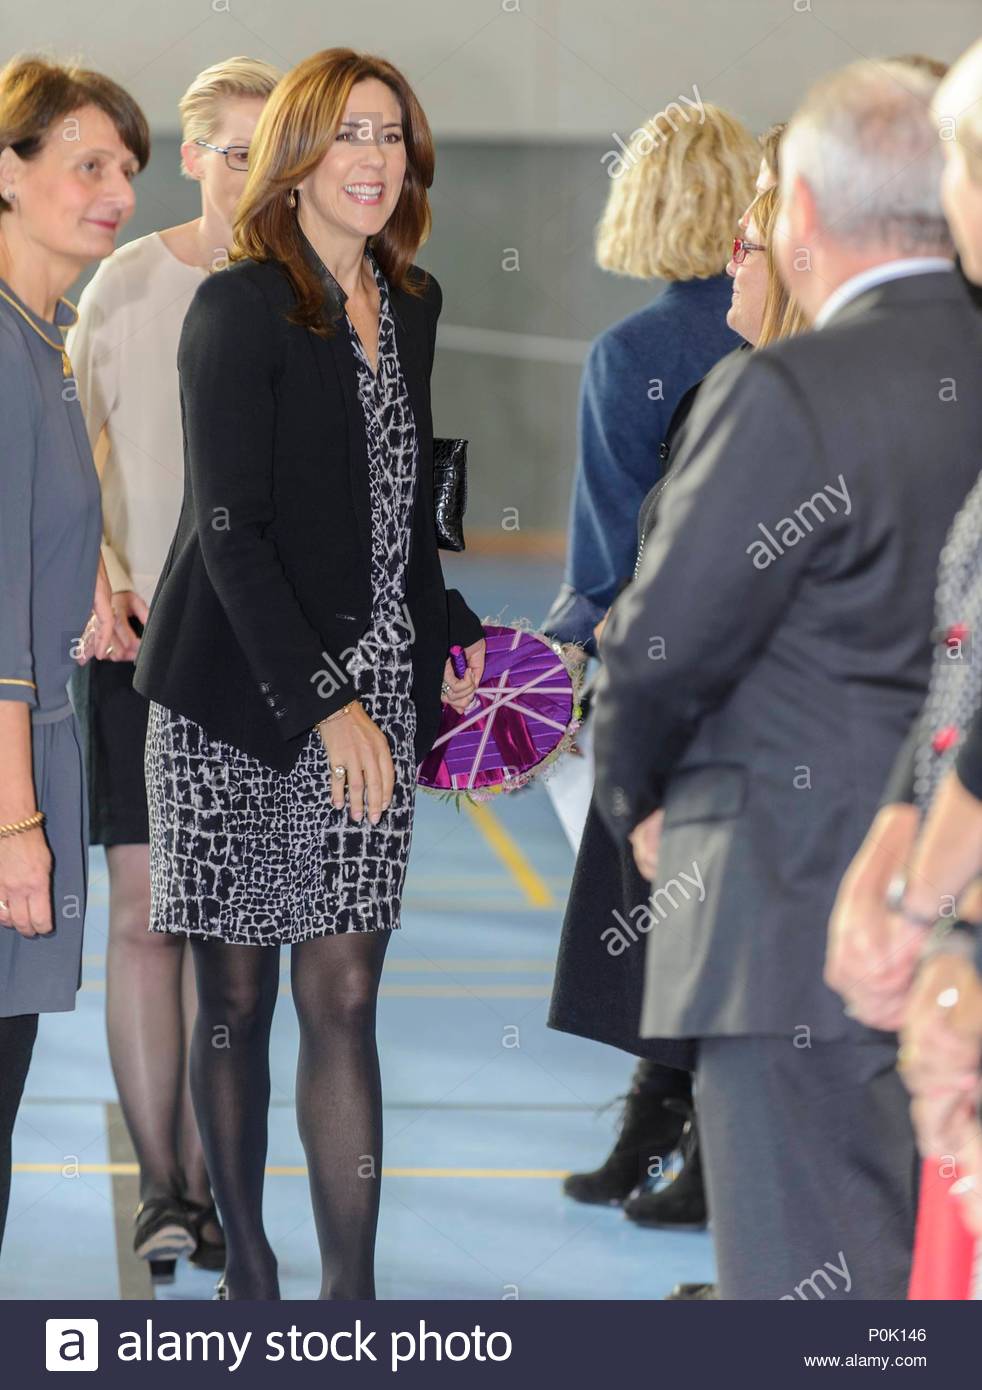 hrh-crown-princess-mary-of-denmark-no-web-until-23-october-2014-hrh-crown-princess-mary-visits-the-tietgen-business-college-in-odense-in-connection-with-the-mary-foundation-project-netwerk-8-october-2014-P0K146.jpg